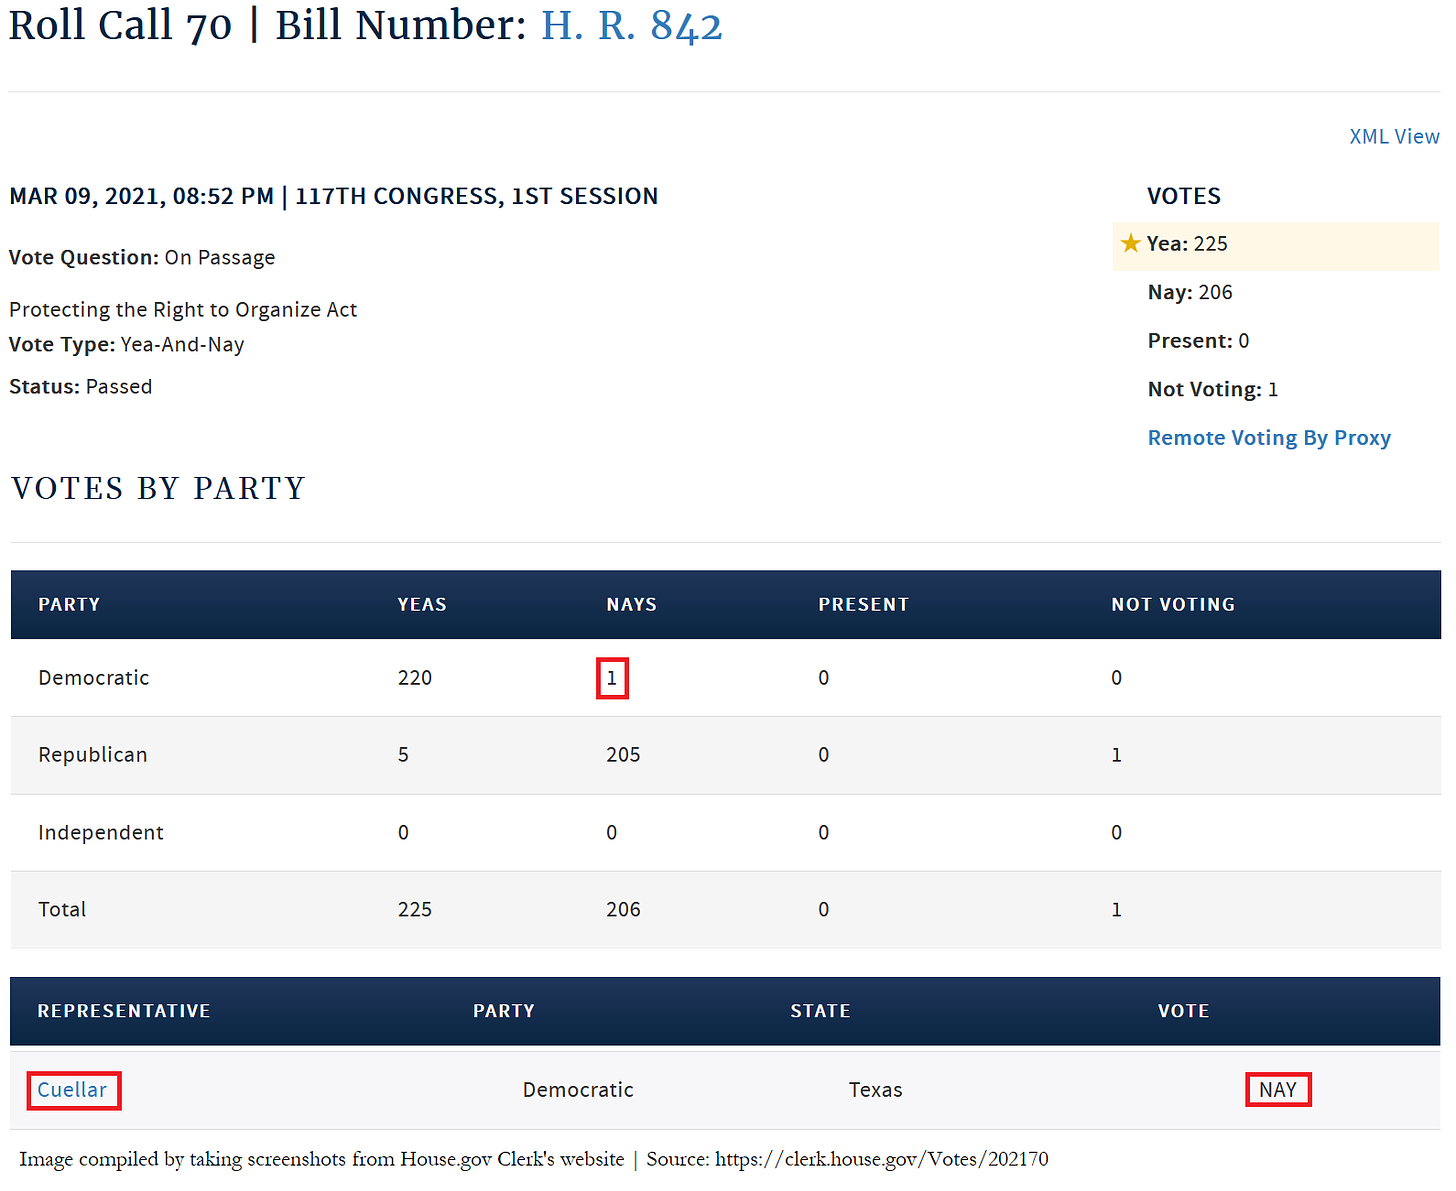 Roll call 70 | Bill Number: H.R. 842